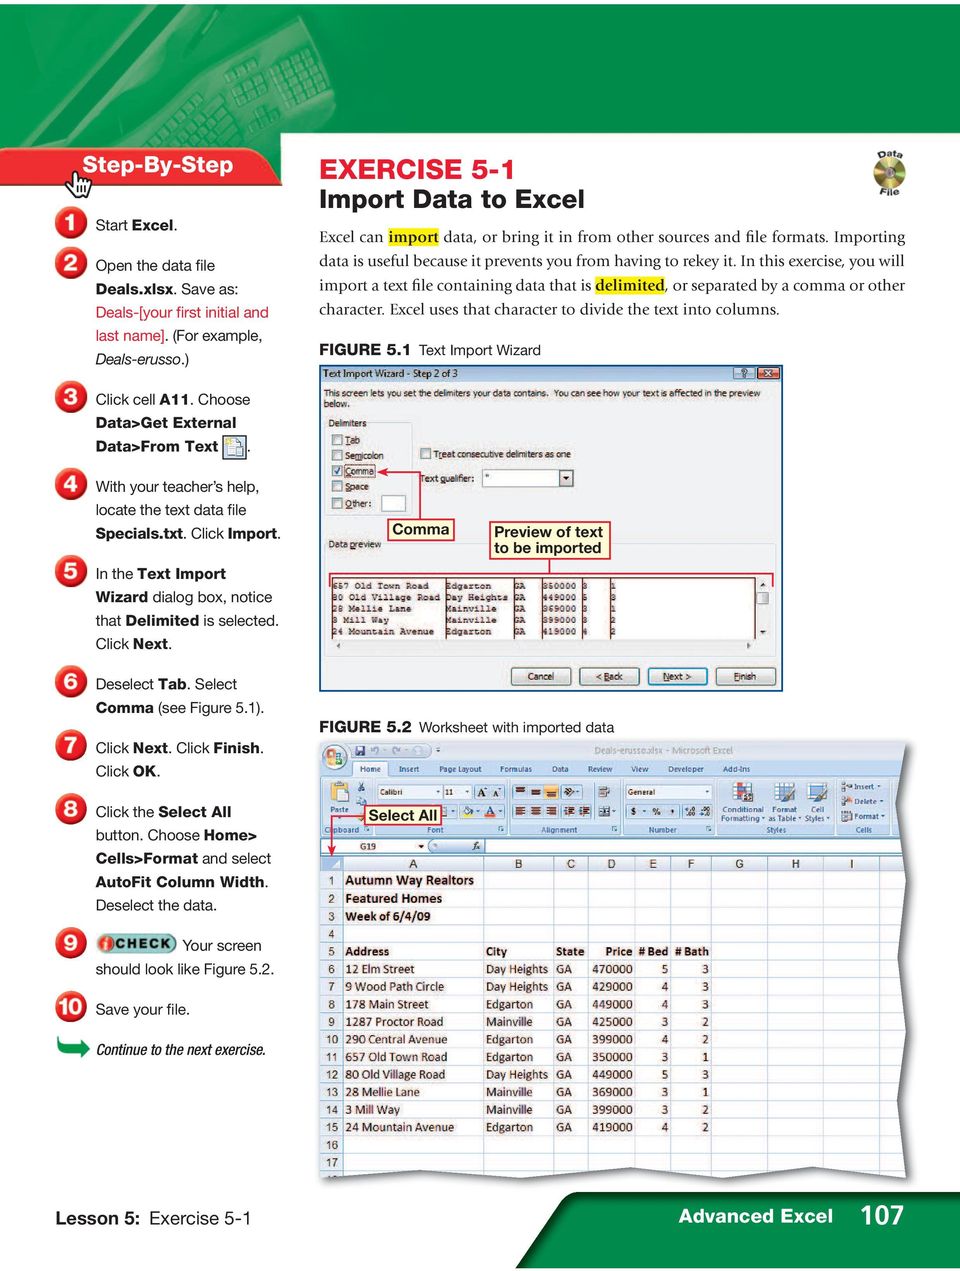 Save as: import a text file containing data that is delimited, or separated by a comma or other Deals-[your first initial and character. Excel uses that character to divide the text into columns.